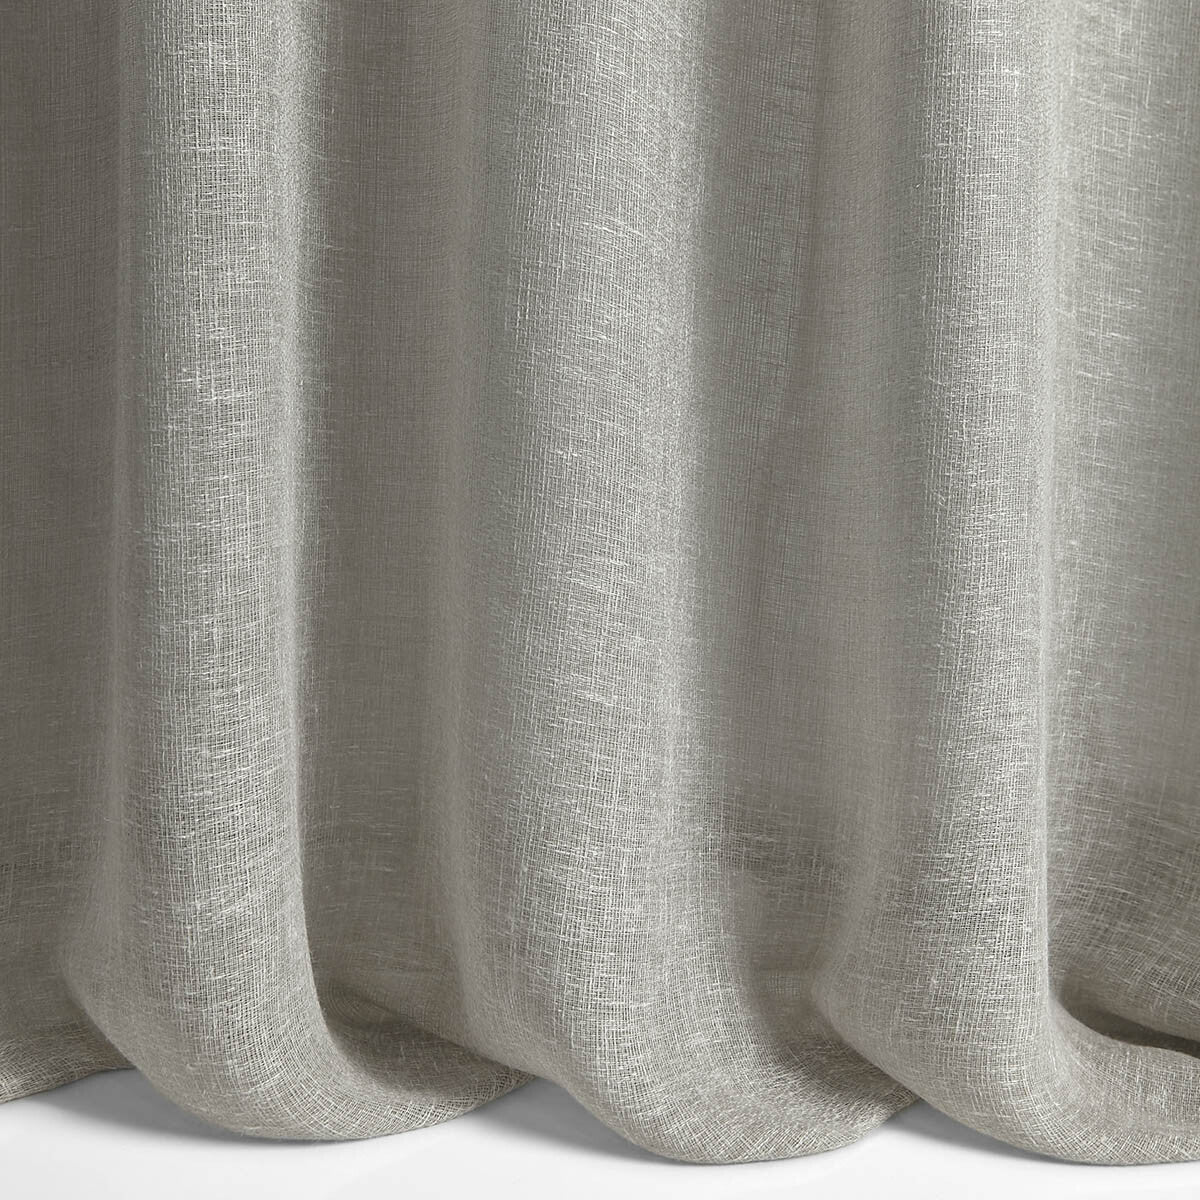 Fugaz fabric in 1 color - pattern LZ-30406.01.0 - by Kravet Couture in the Lizzo collection